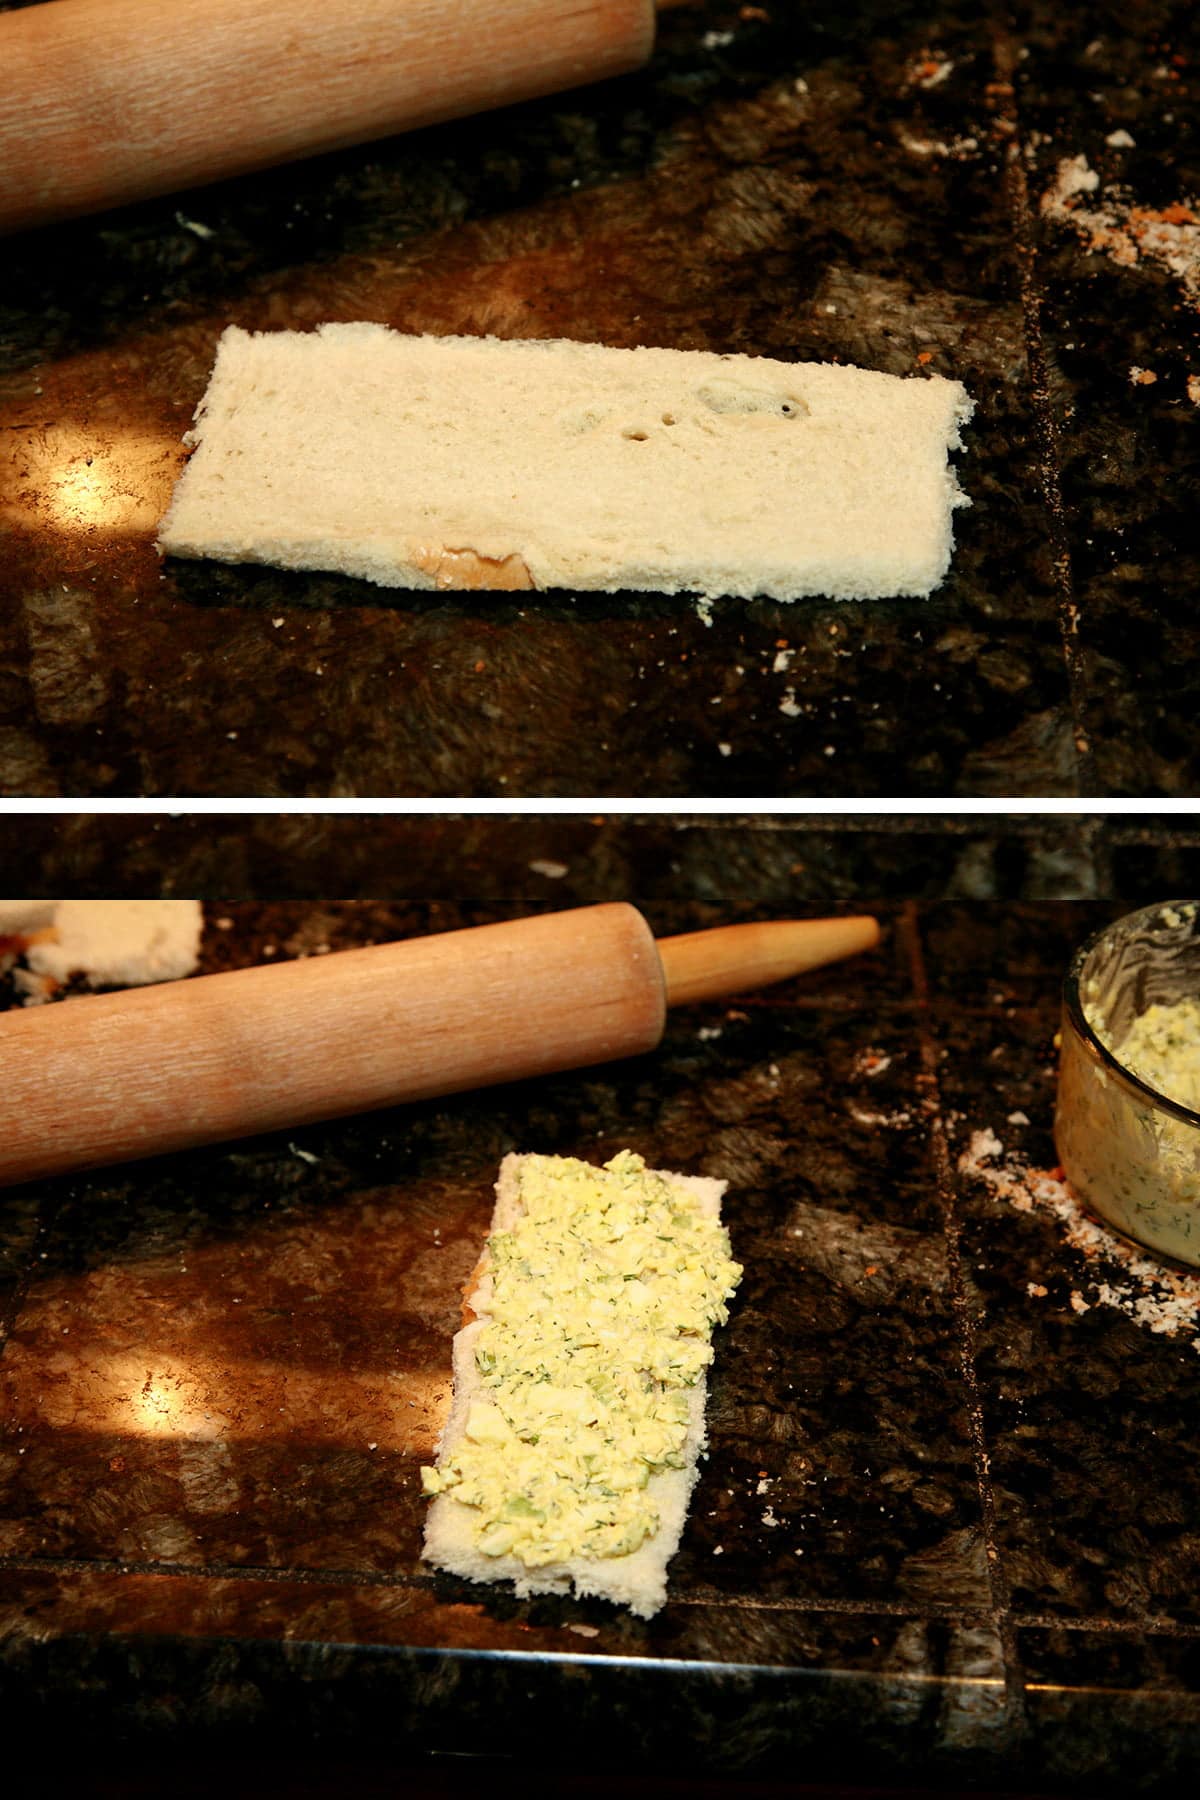 A two part compilation image showing a long slice of bread having egg salad applied to it.